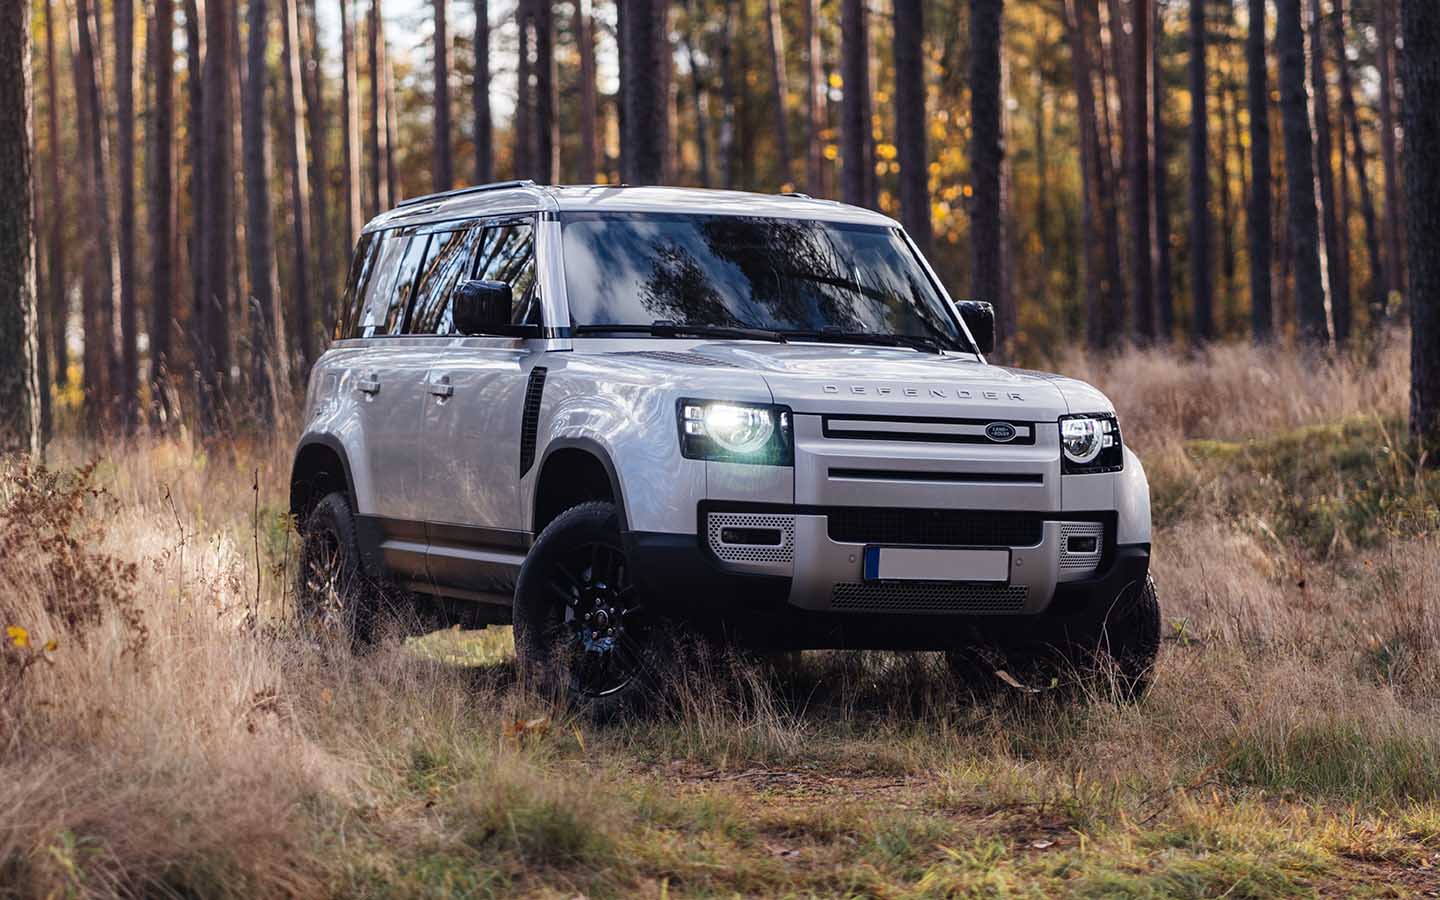 the land rover defender is among the cars with the highest towing capacity